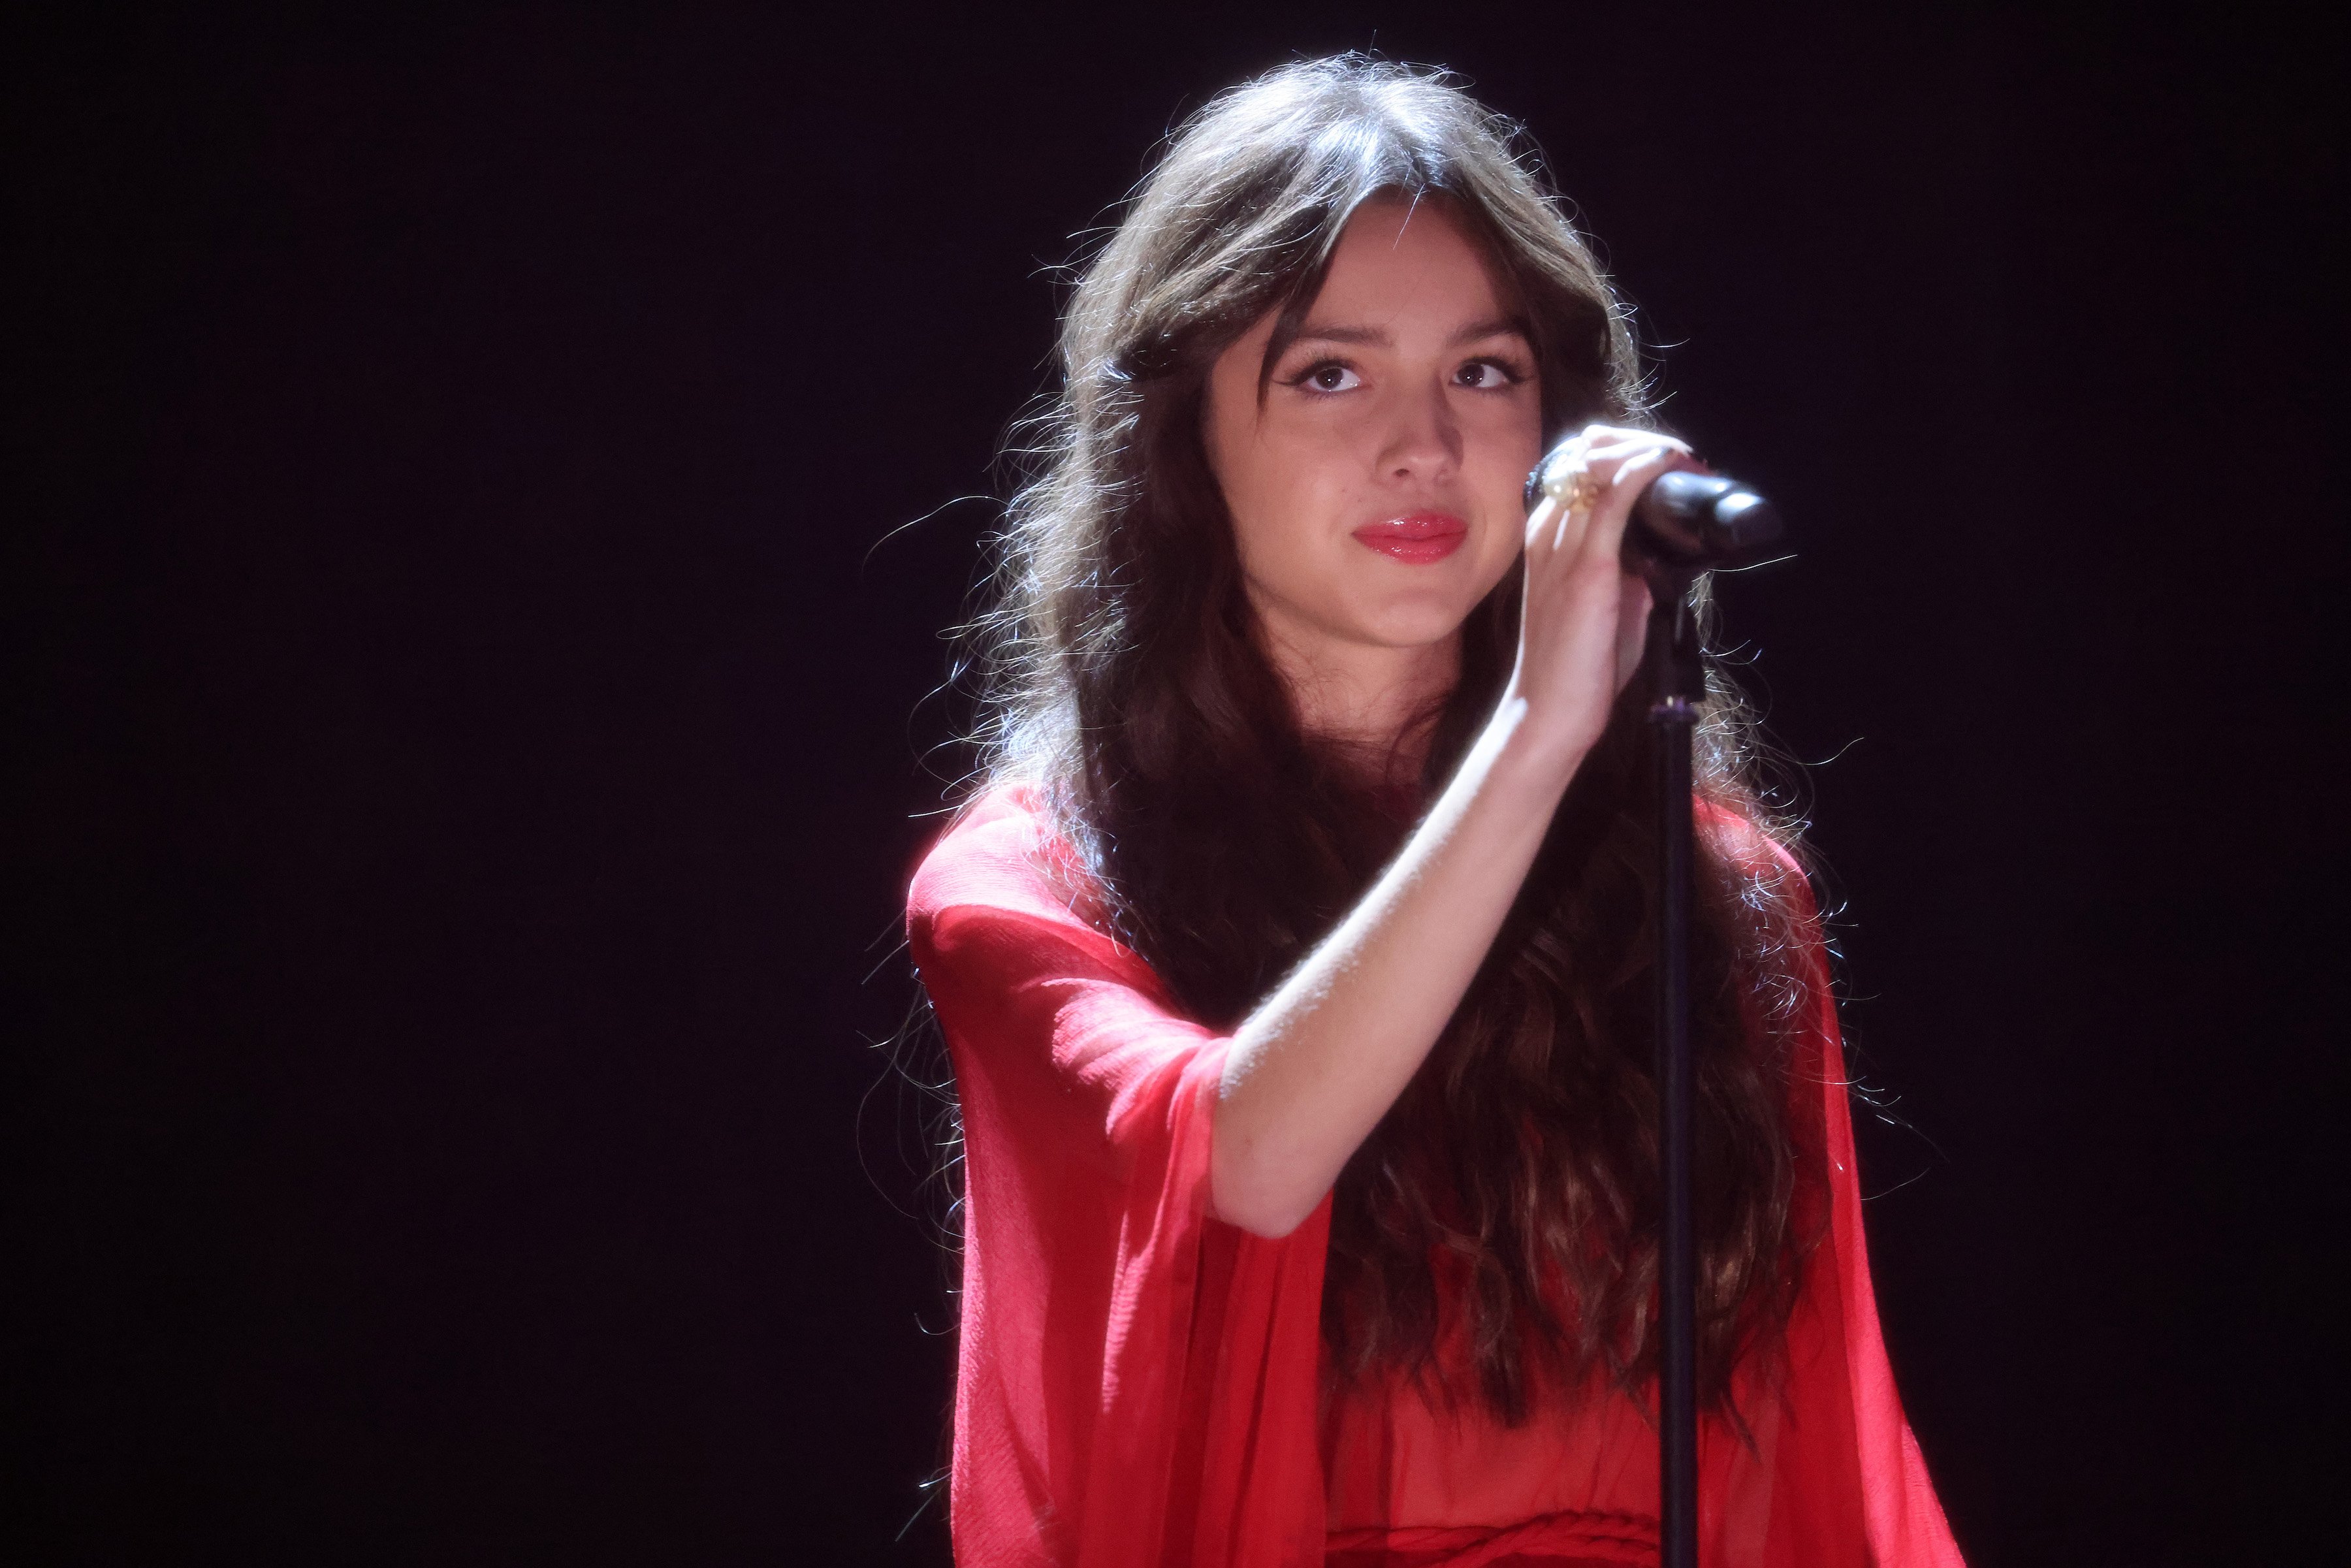 Olivia Rodrigo performed during The BRIT Awards 2021 in a red dress